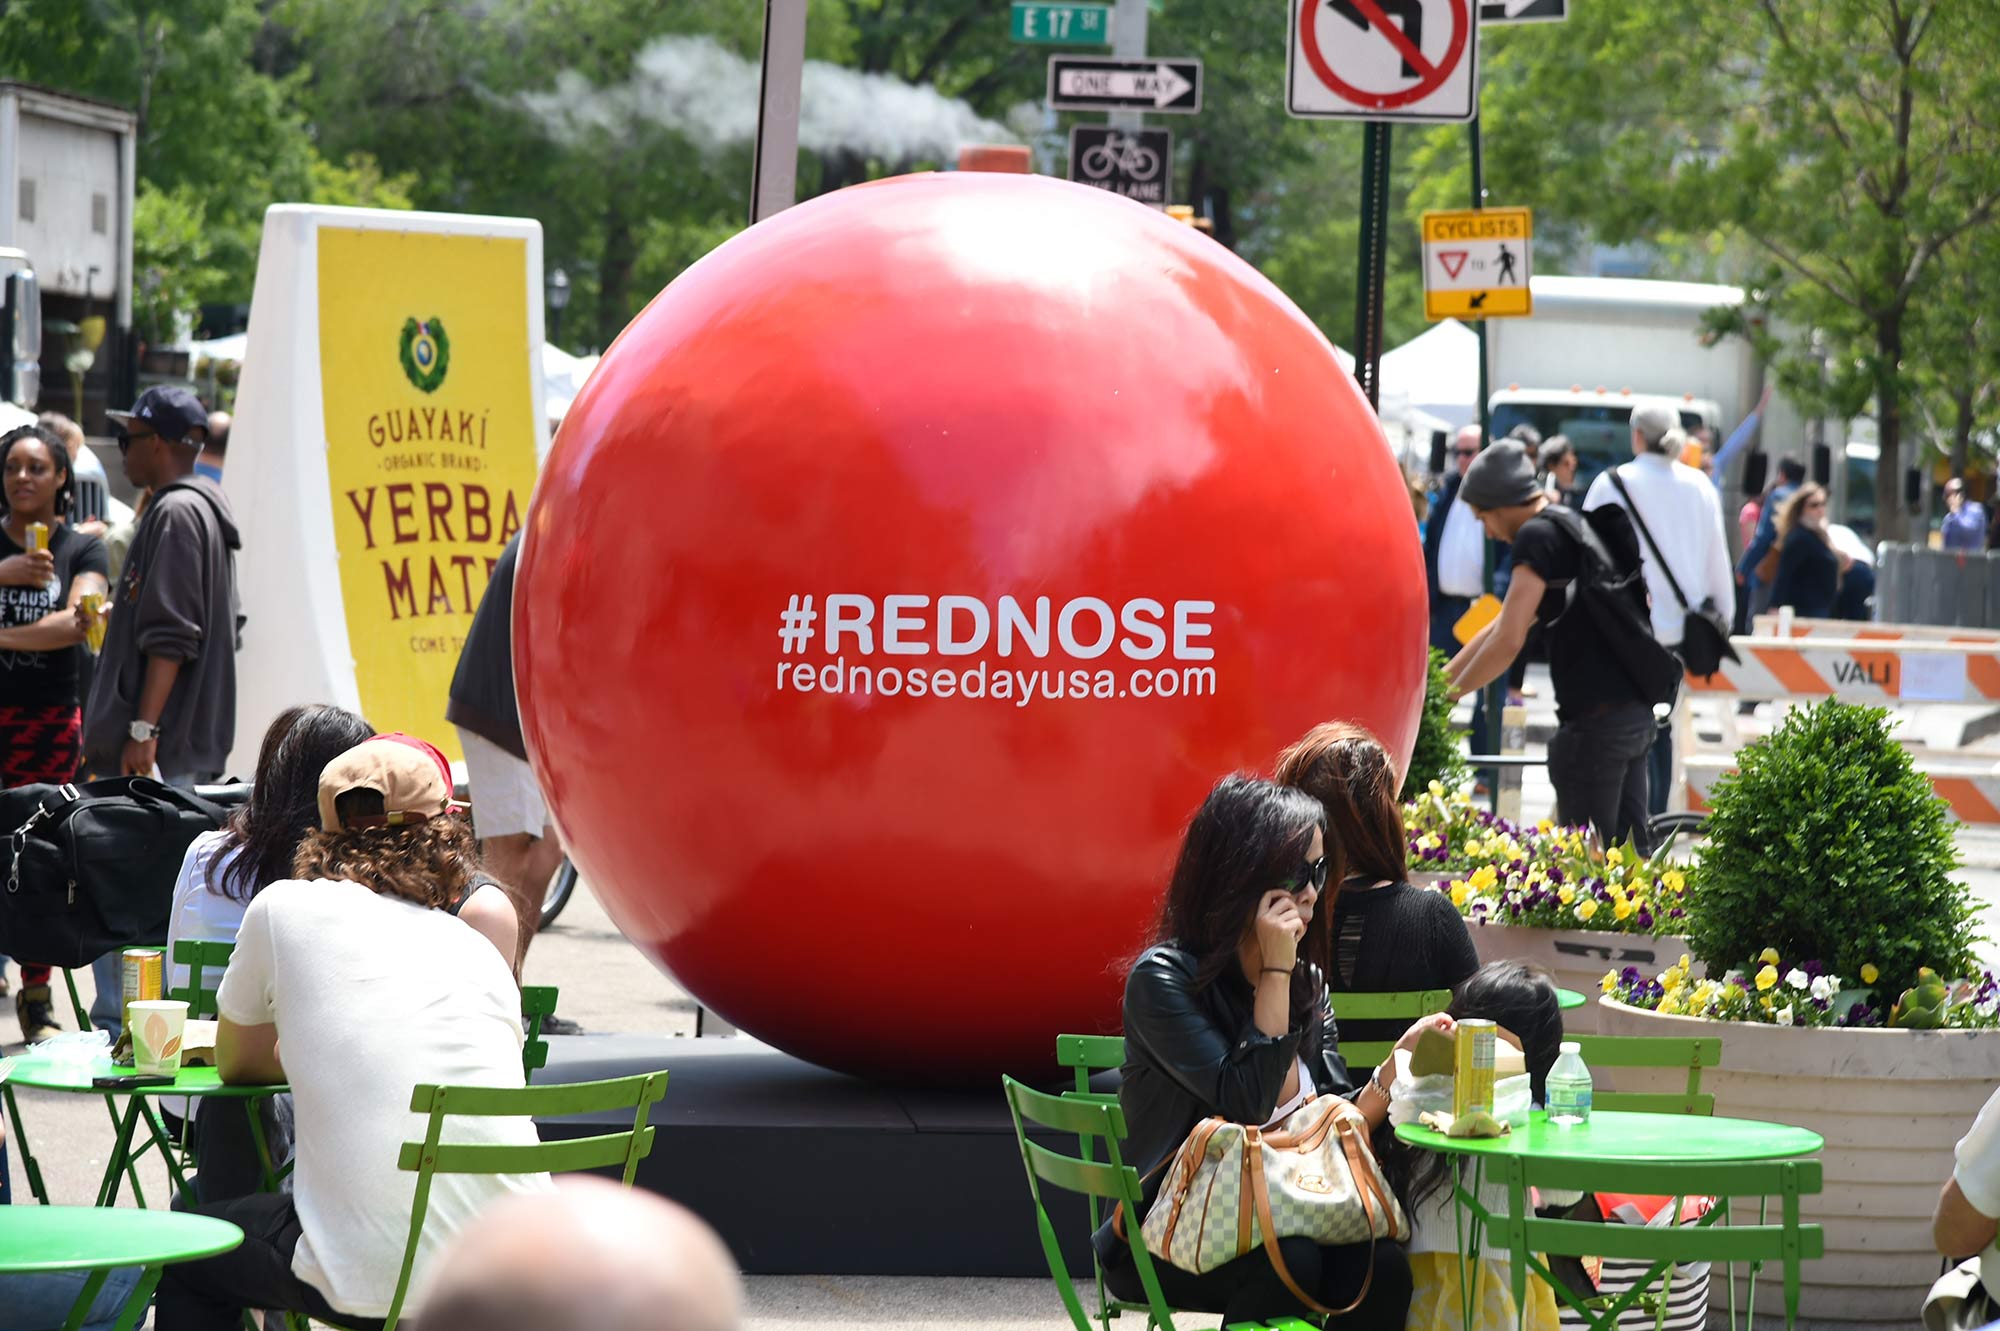 One of 5 larger-than-life Red Nose statues made for an unmistakeable sight in Union Square.